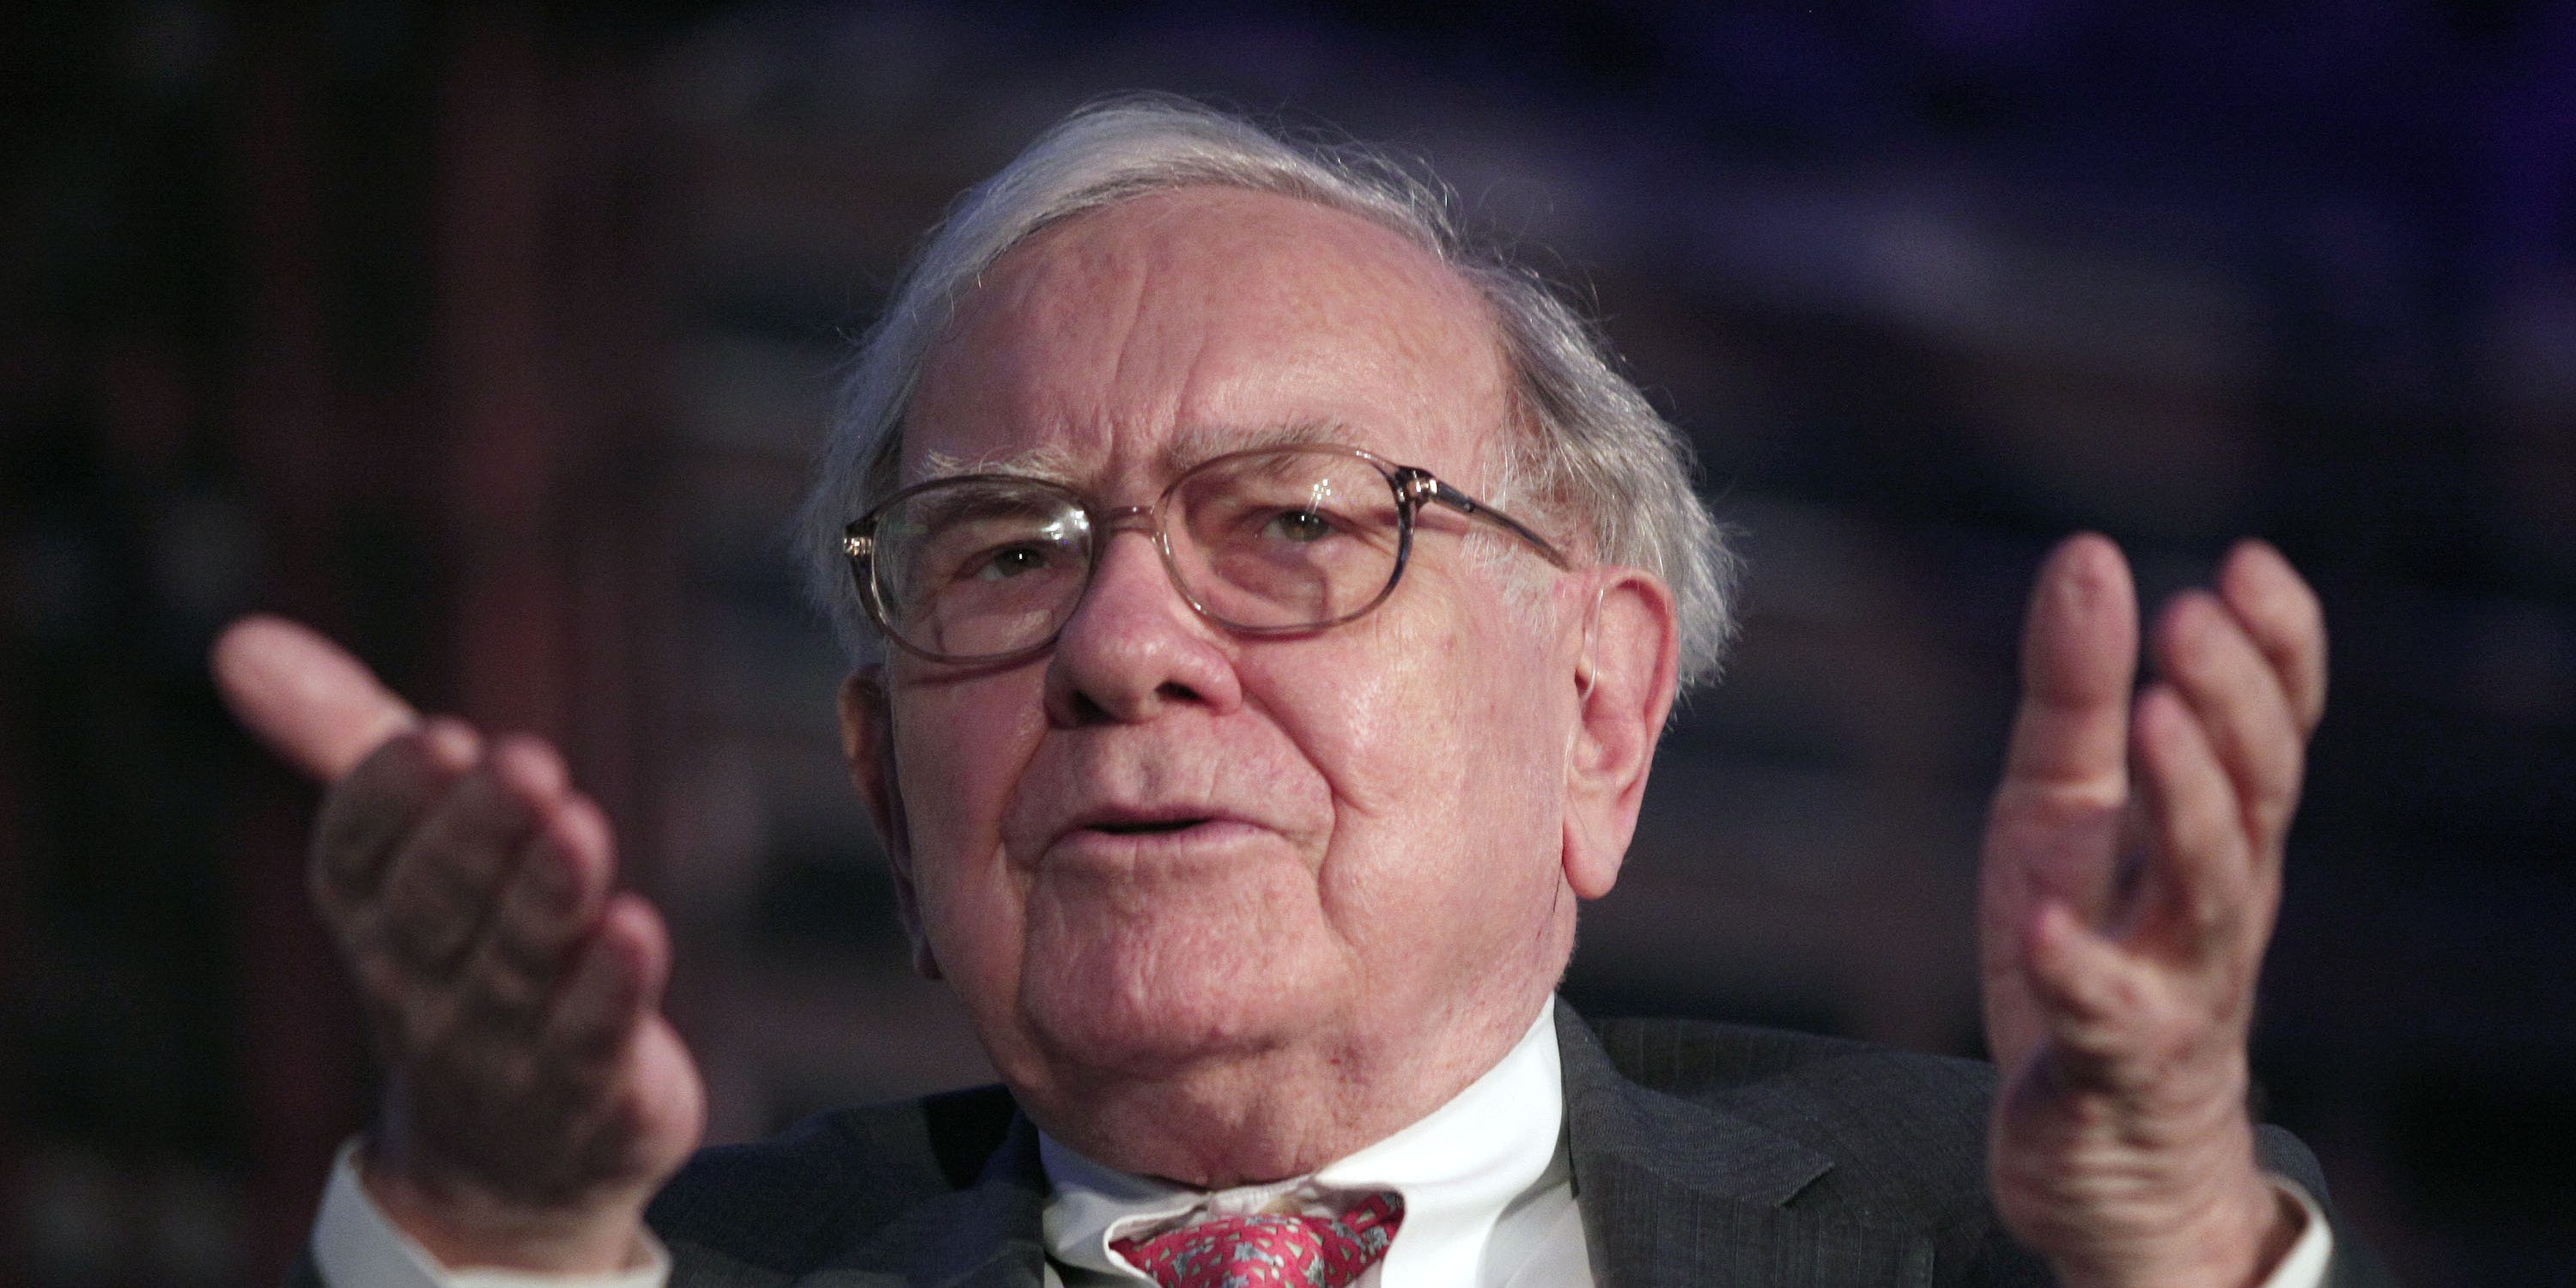 microsoft, warren buffett had to work from his iphone for days after lines went down at berkshire hathaway